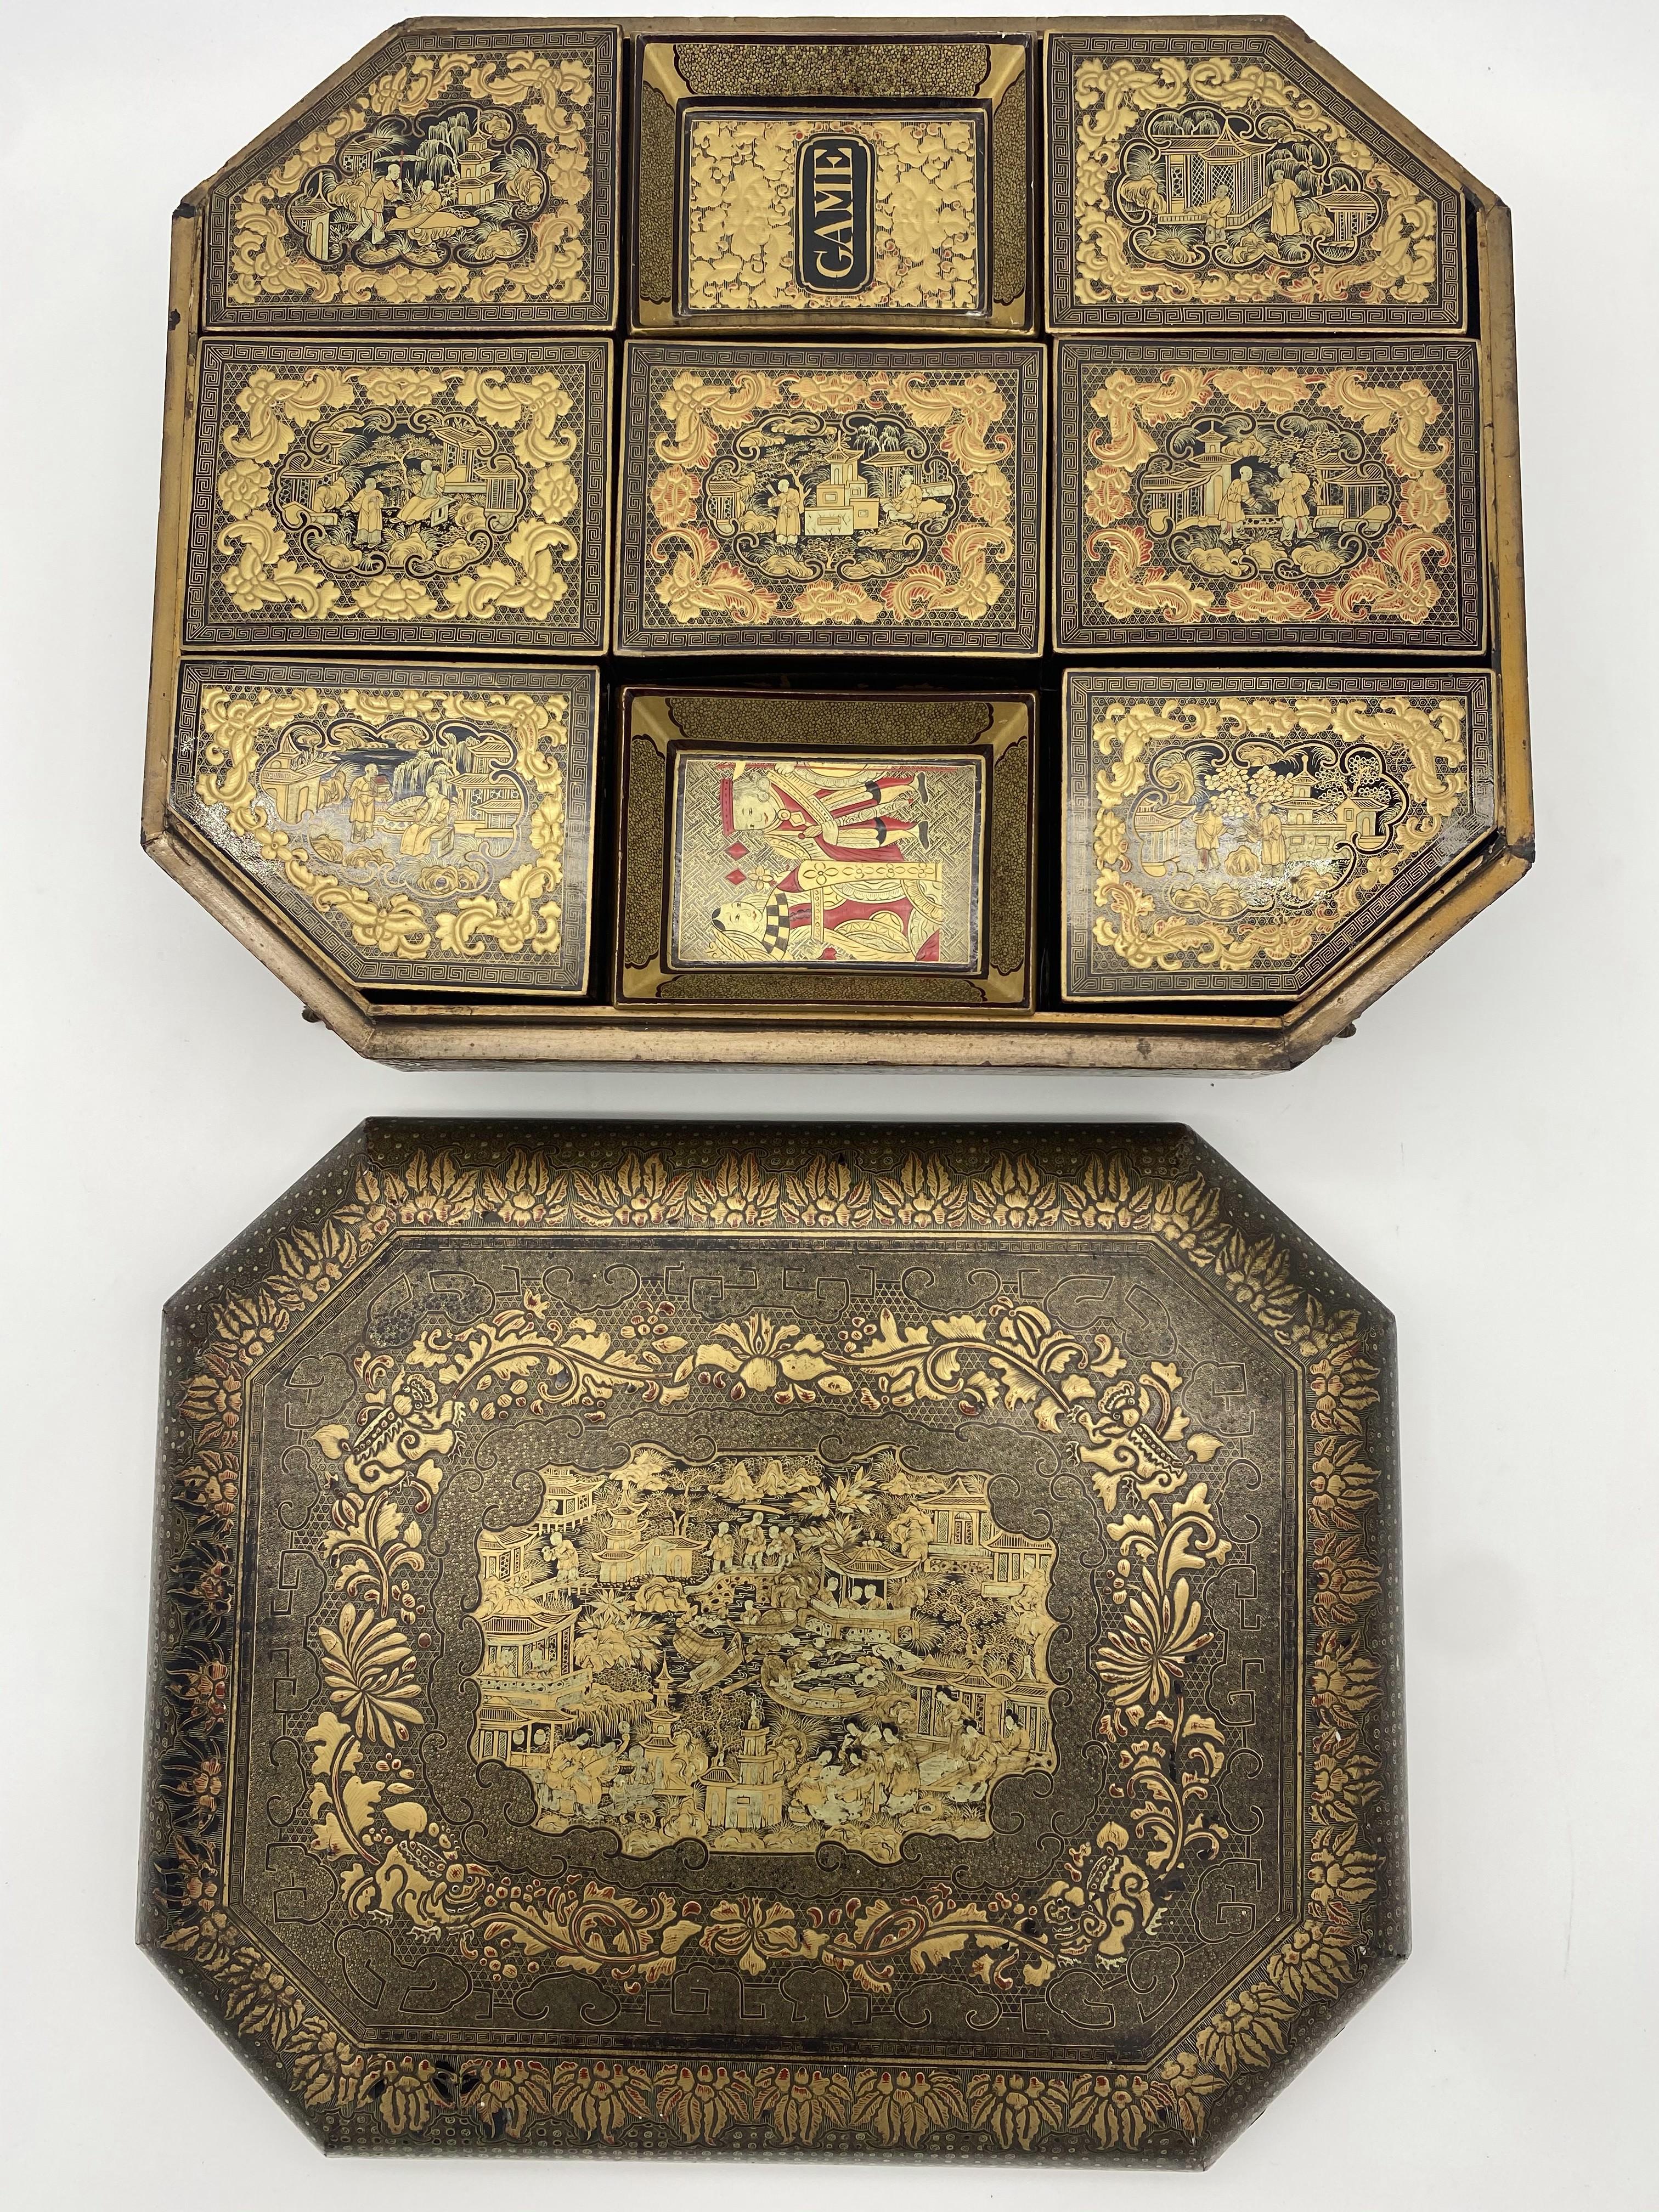 Antique 19th Century Export Chinese Lacquer Gaming Box For Sale 2